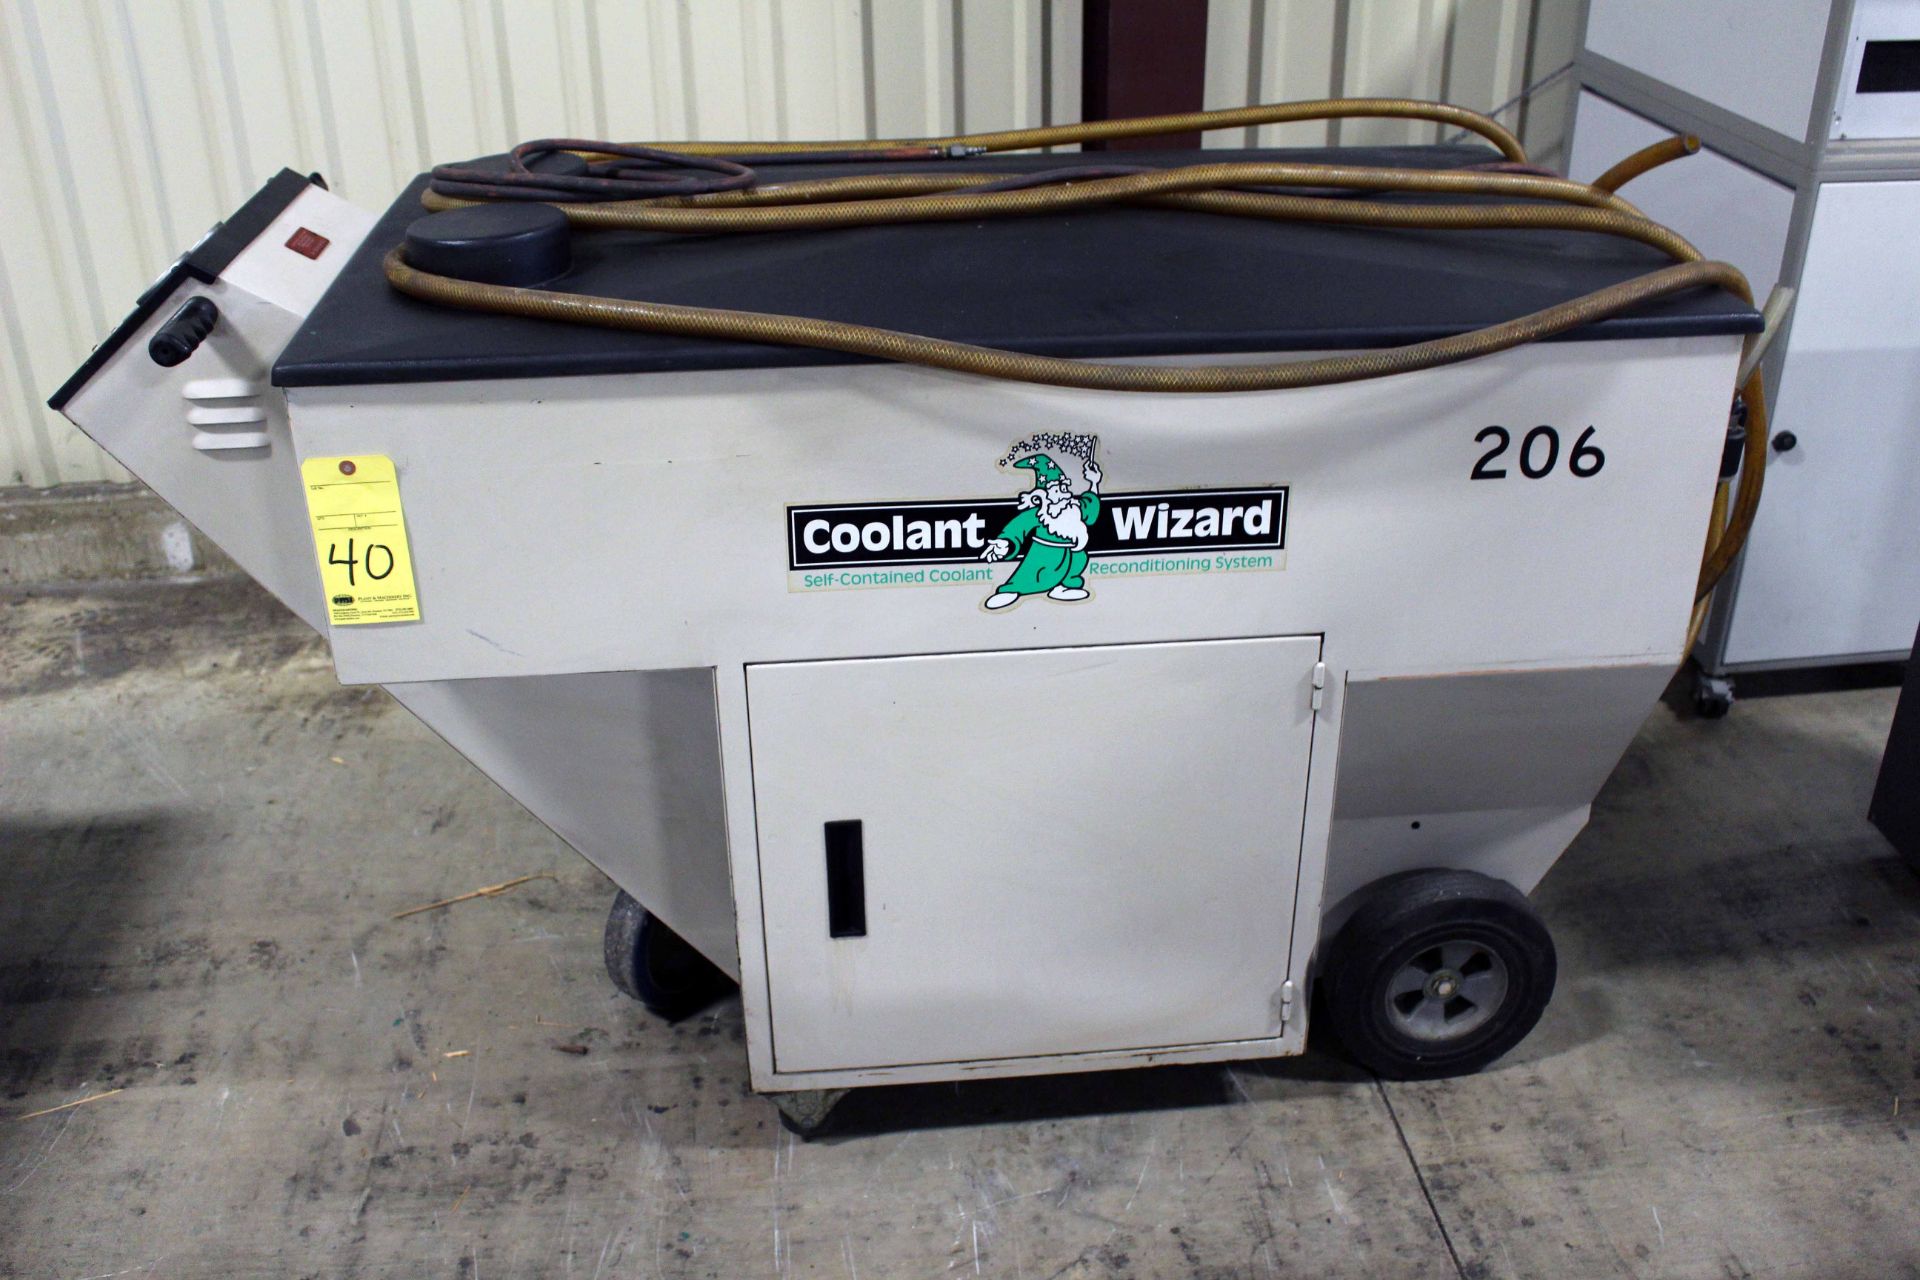 SELF-CONTAINED COOLANT RECONDITIONING SYSTEM, KOOLANT WIZARD